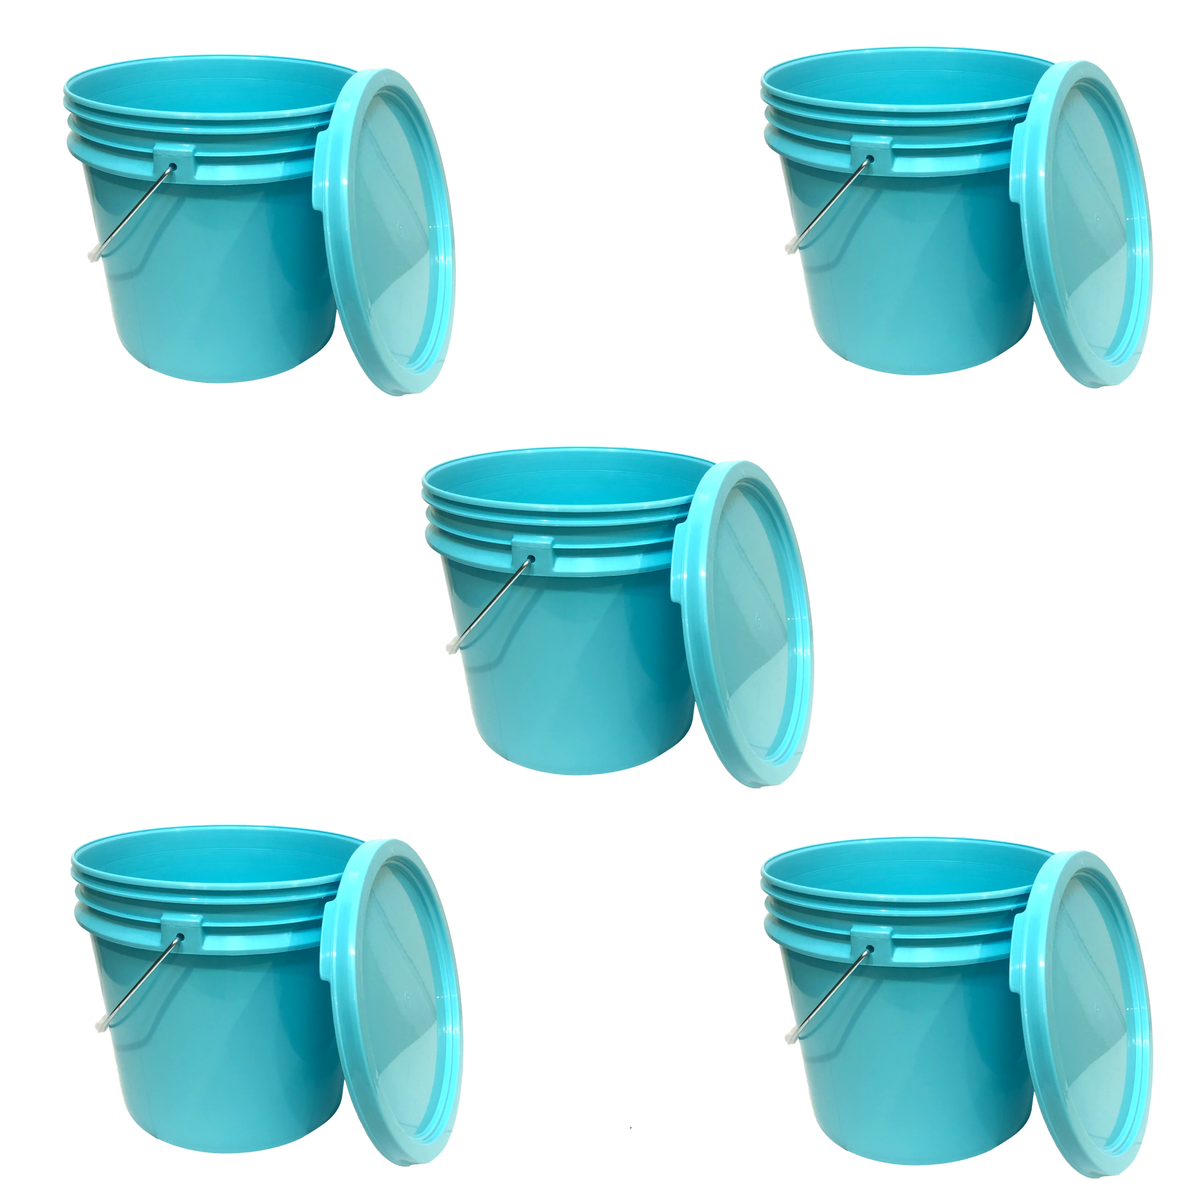 3.5 Gallon Bucket with Lid - Durable All Purpose Pail Food Safe, BPA Free, Commercial Grade (Aqua, 1)